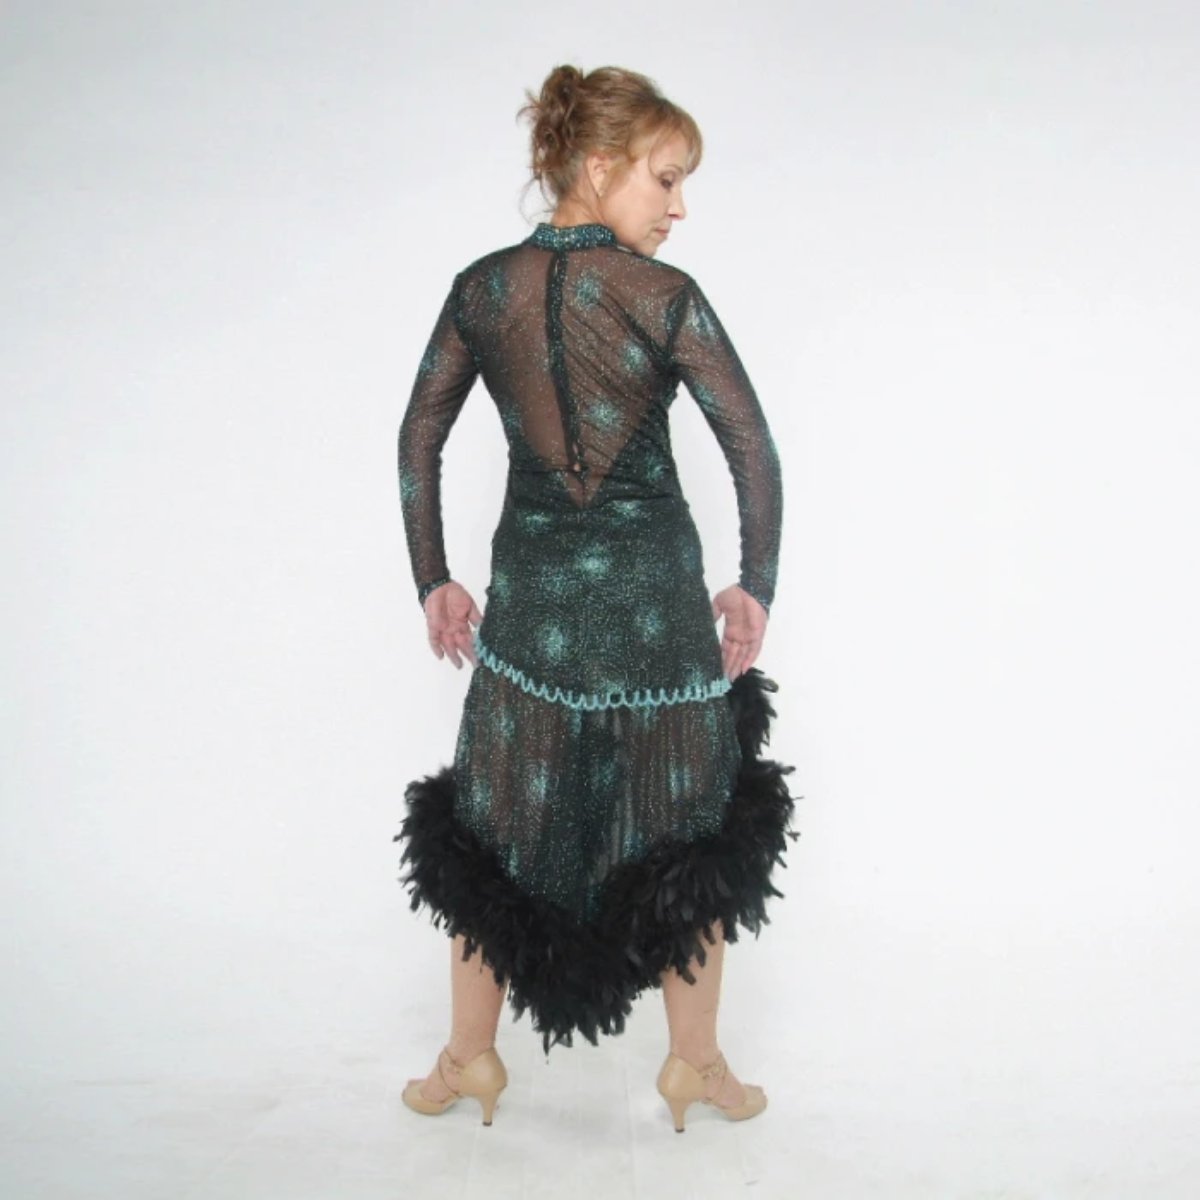 back view of Elegant black Latin/rhythm dance dress was created in a black glitter sheer mesh with aqua glitter bursts over black lycra body suit, embellished with jet AB Swarovski stones, hand beading, plus chandelle feathers.